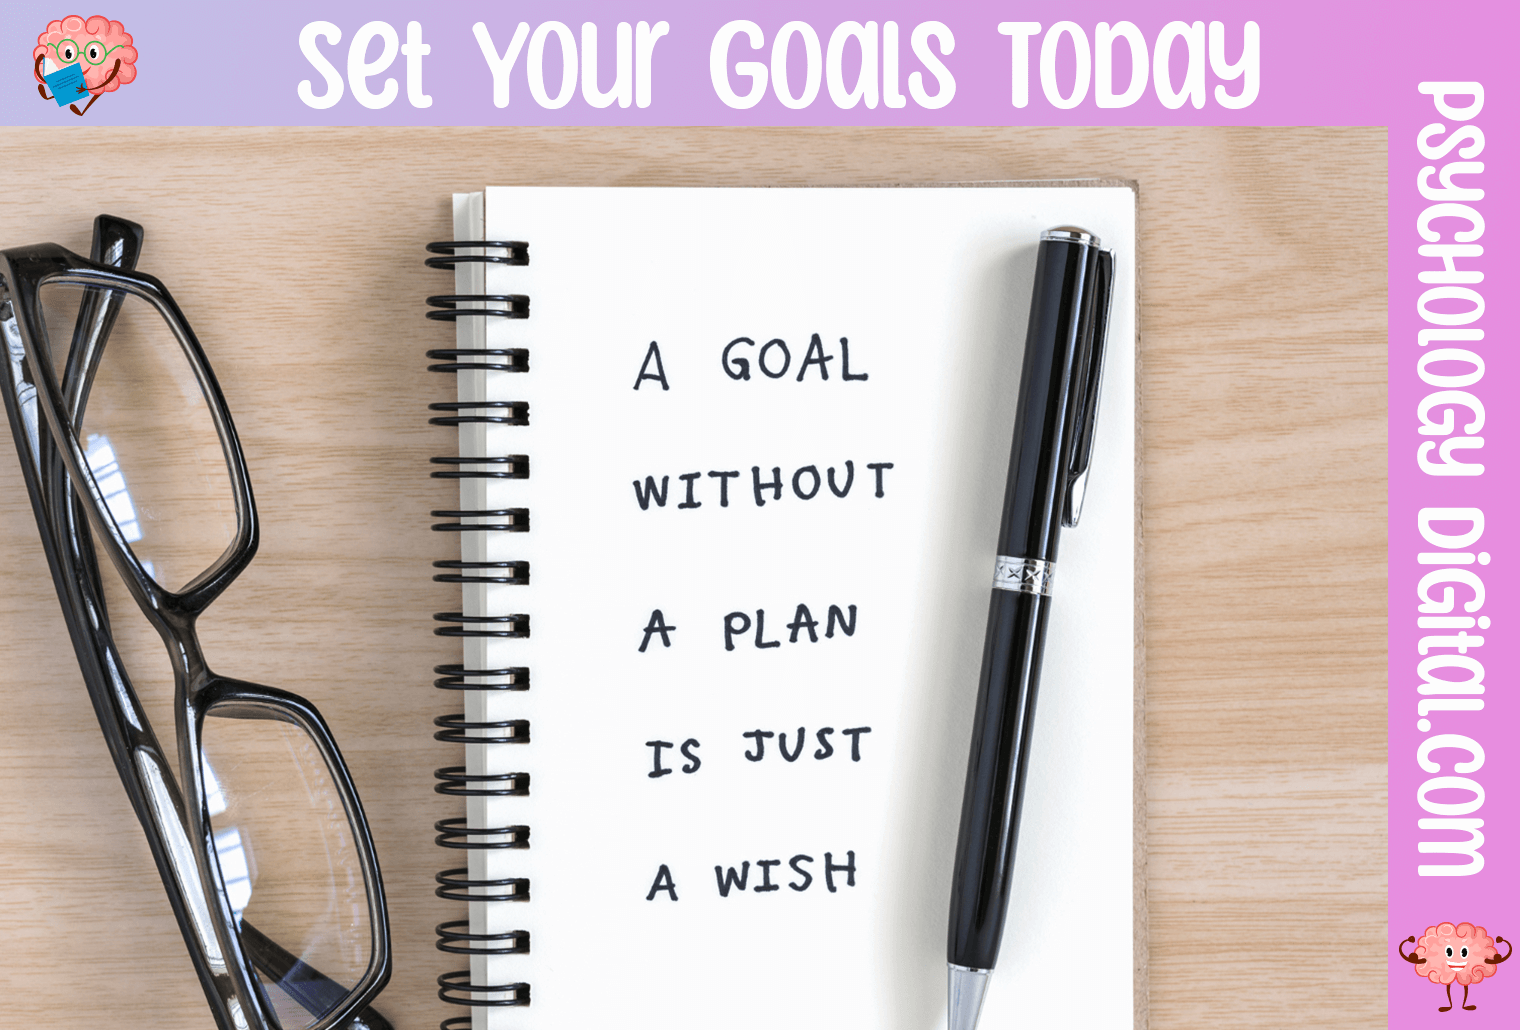 setting-goals-is-important